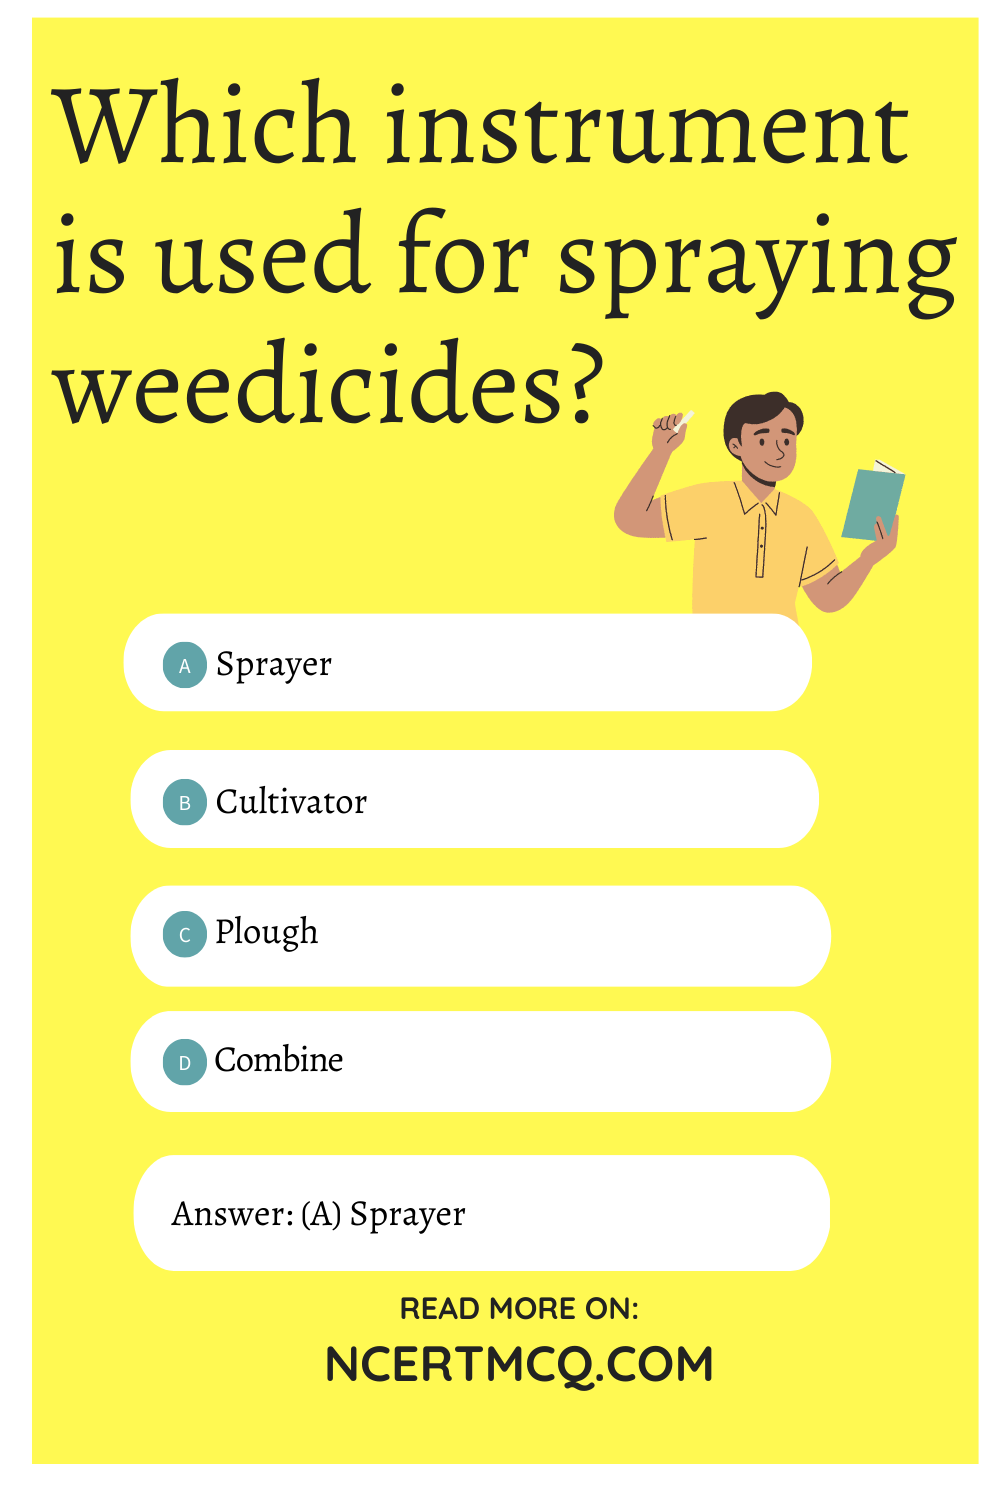 Which instrument is used for spraying weedicides?